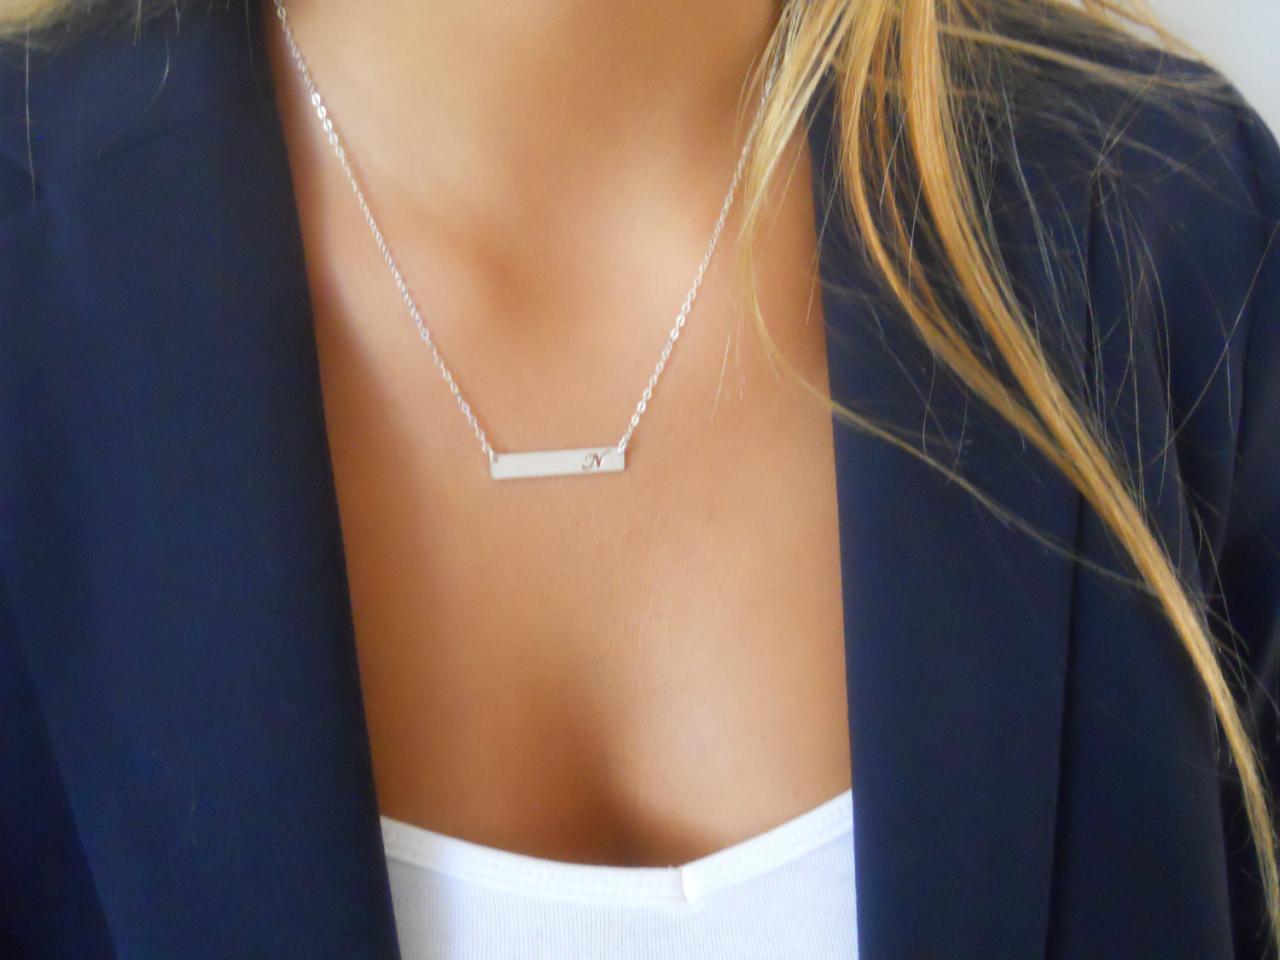 Silver Personalized Bar Necklace, Cut Out Letter, Initial Bar Necklace, Silver Bar Necklace, Silver Layering Necklace, Sterling Silver